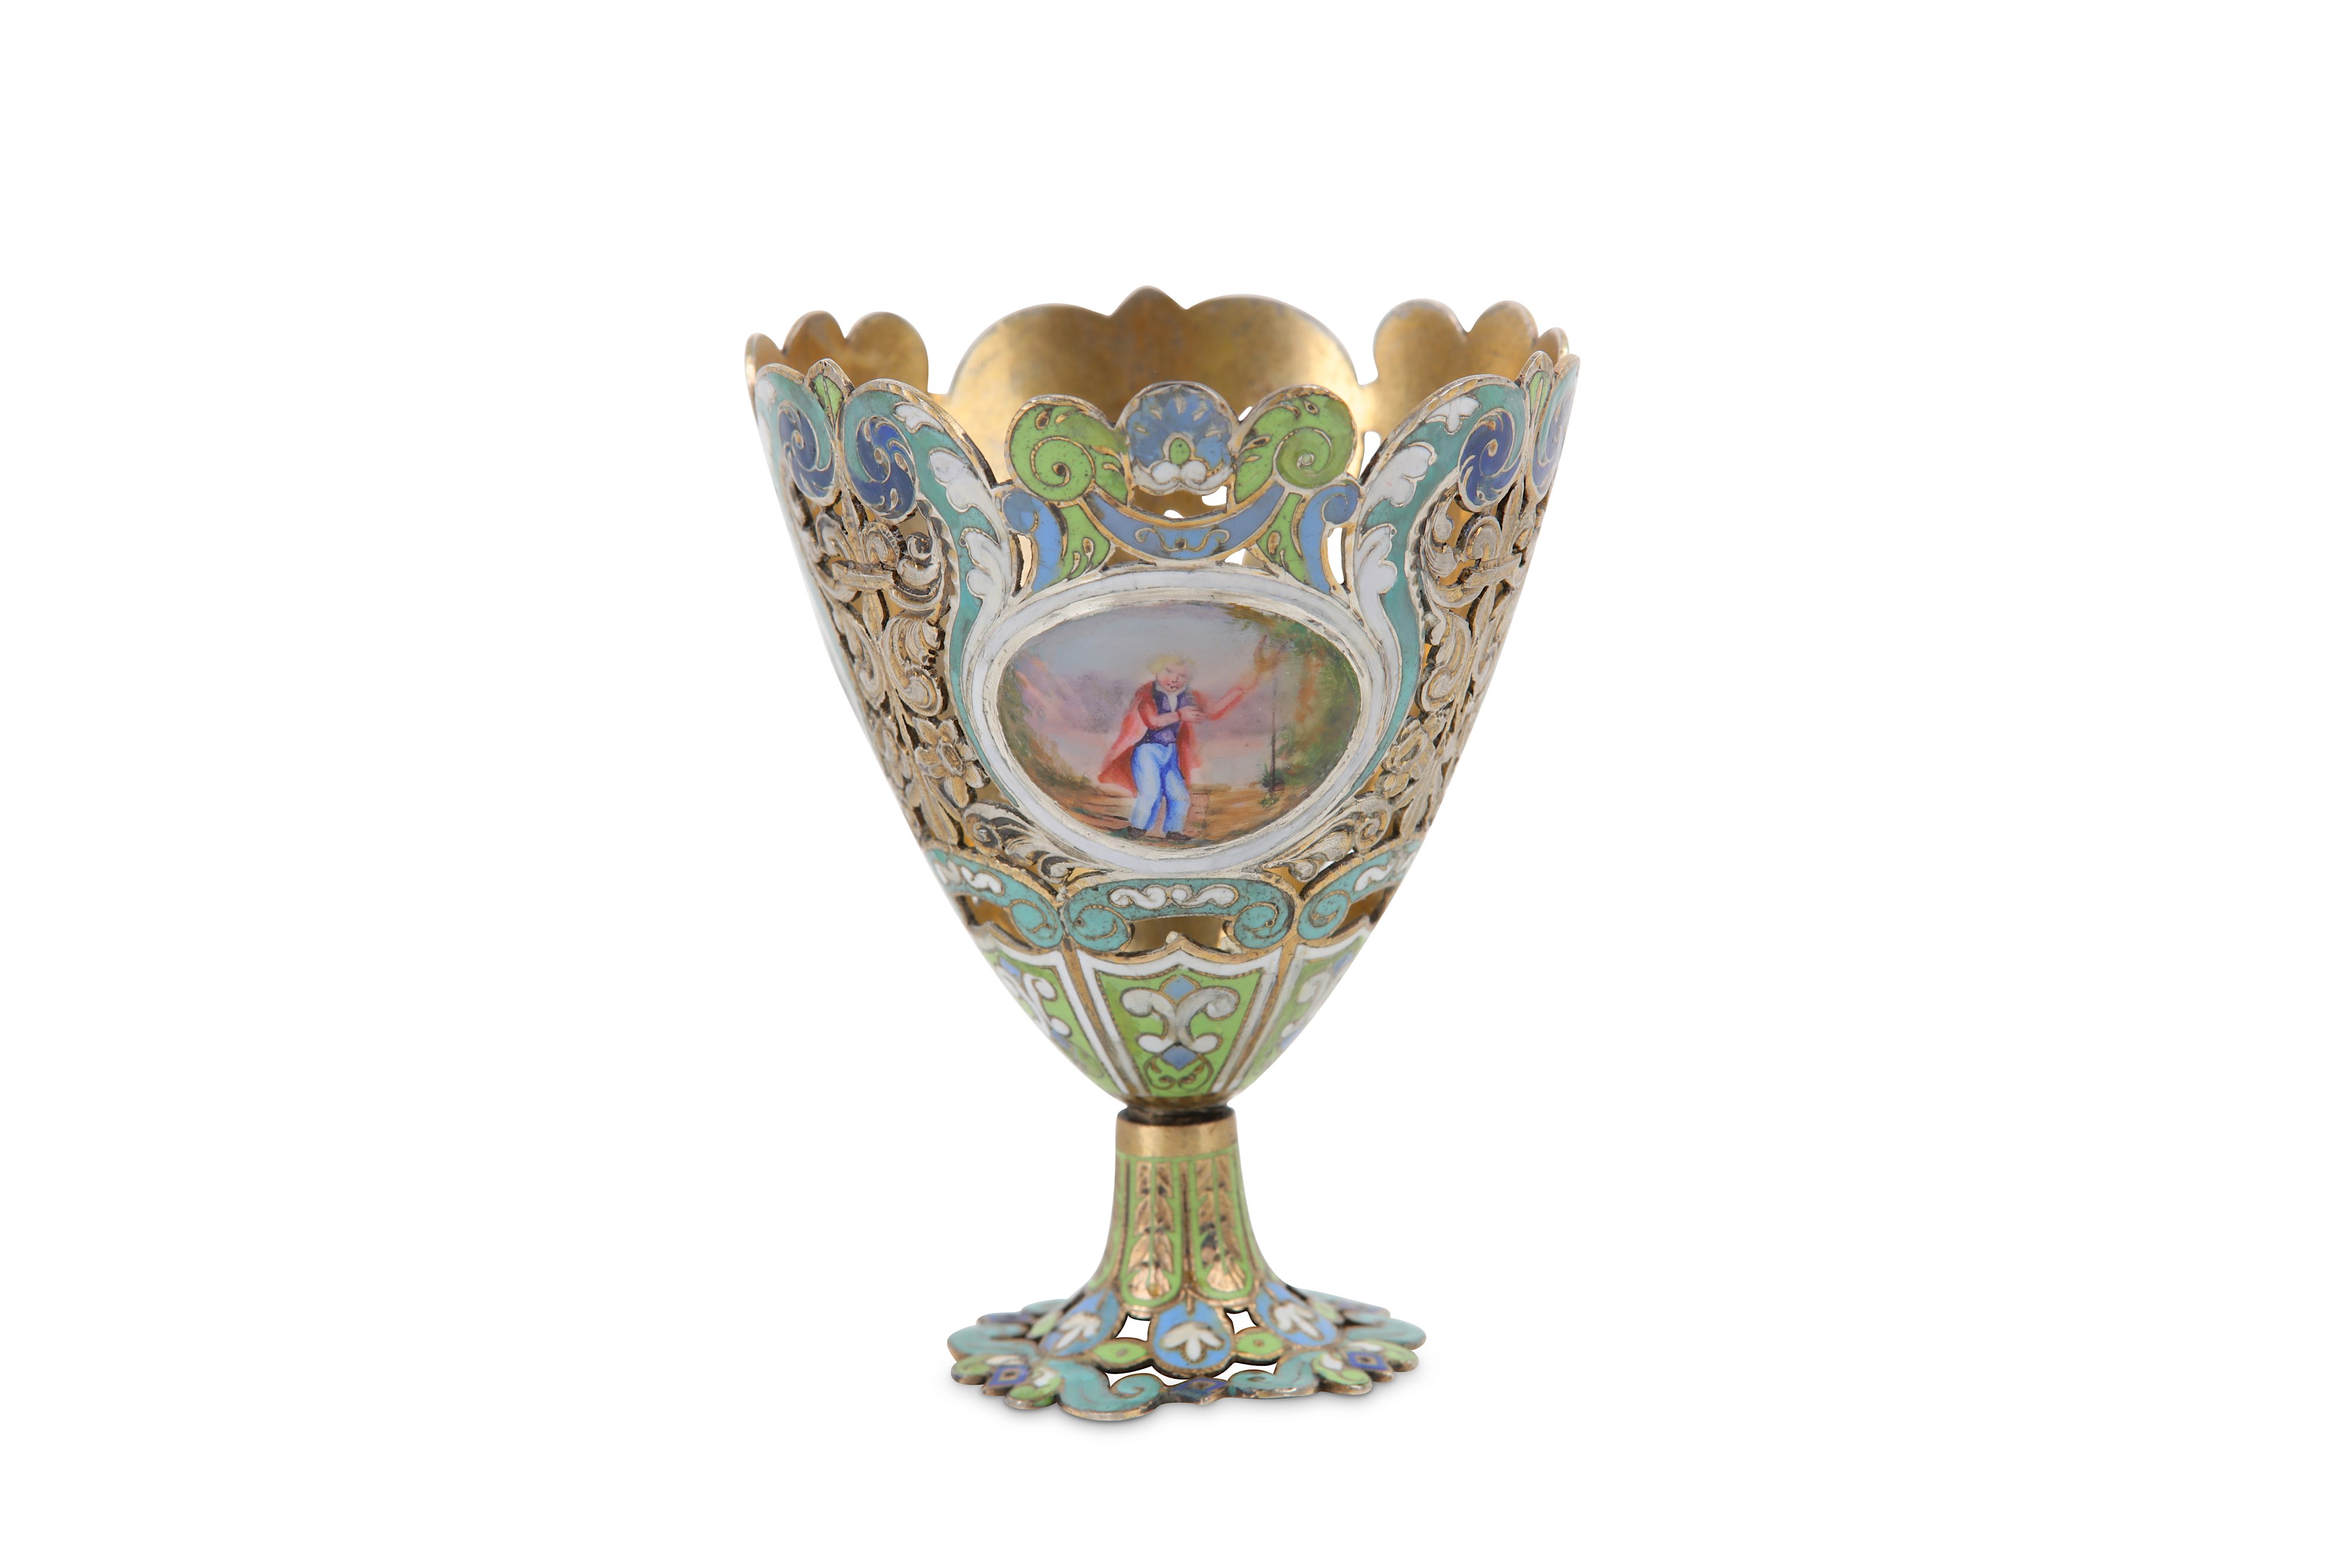 An early 20th century continental unmarked silver-gilt and enamel zarf, possibly Swiss